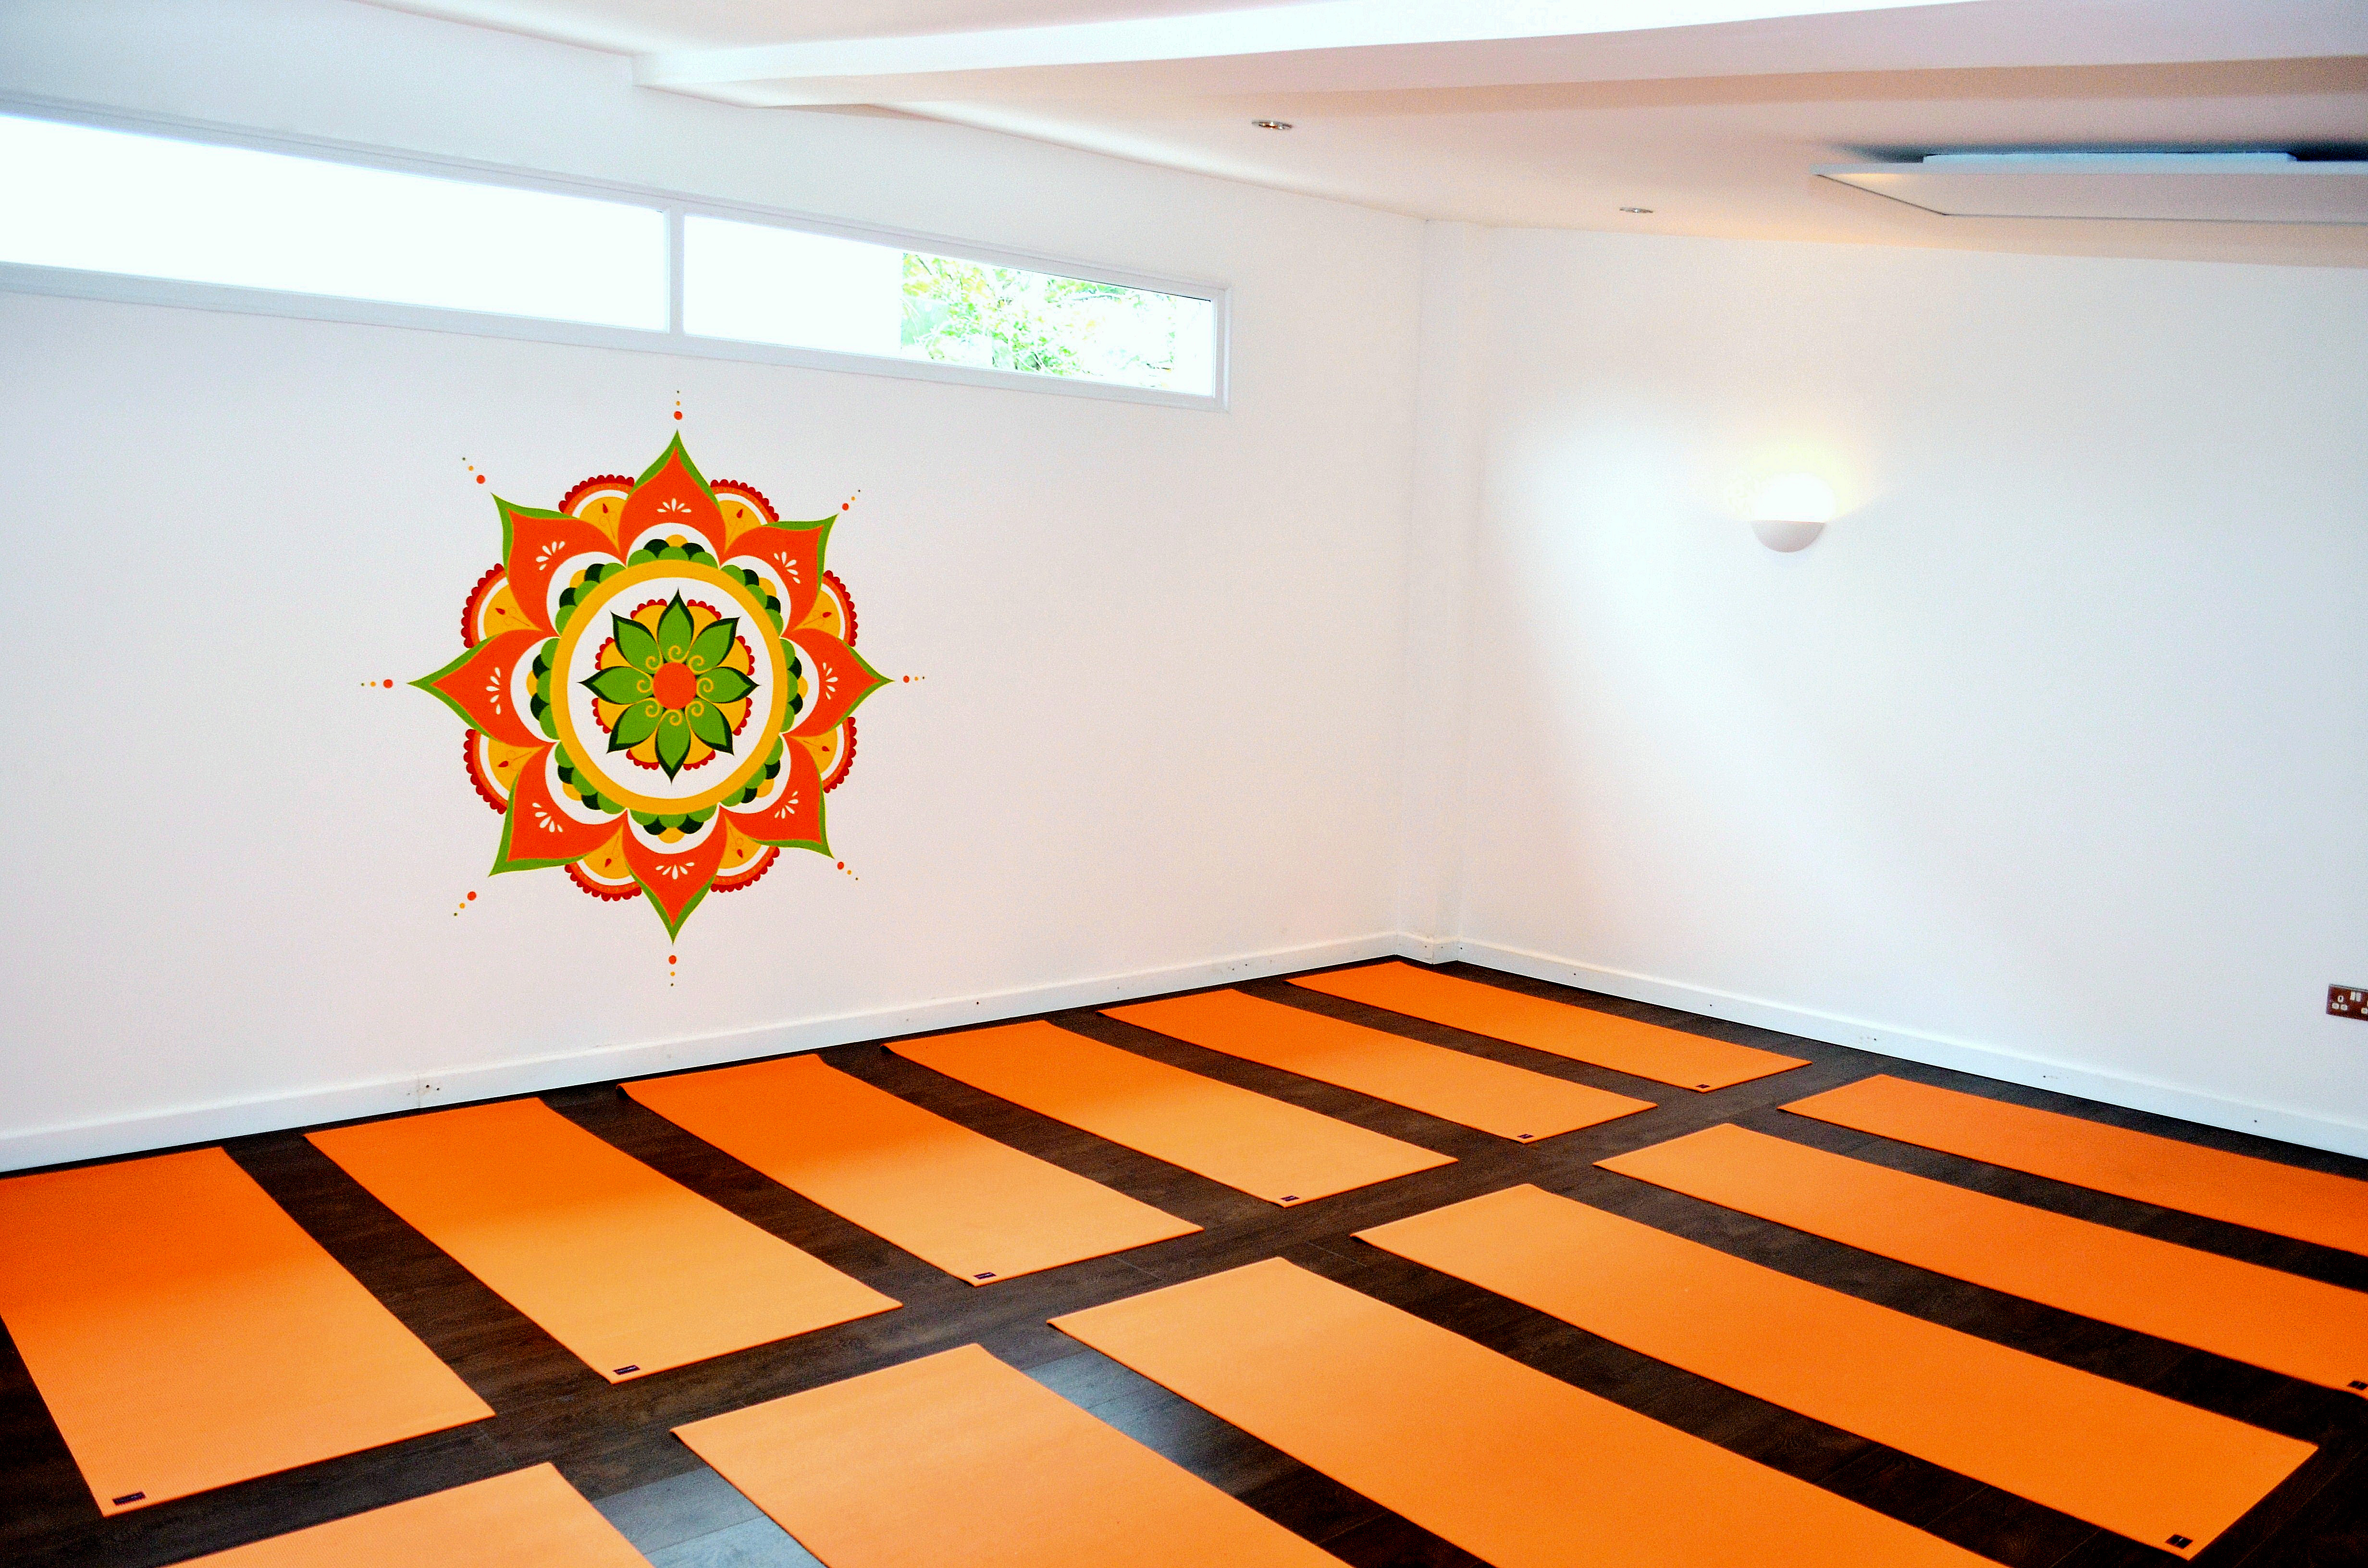 About Om Studio - Om Yoga Studio in the Roath area of Cardiff